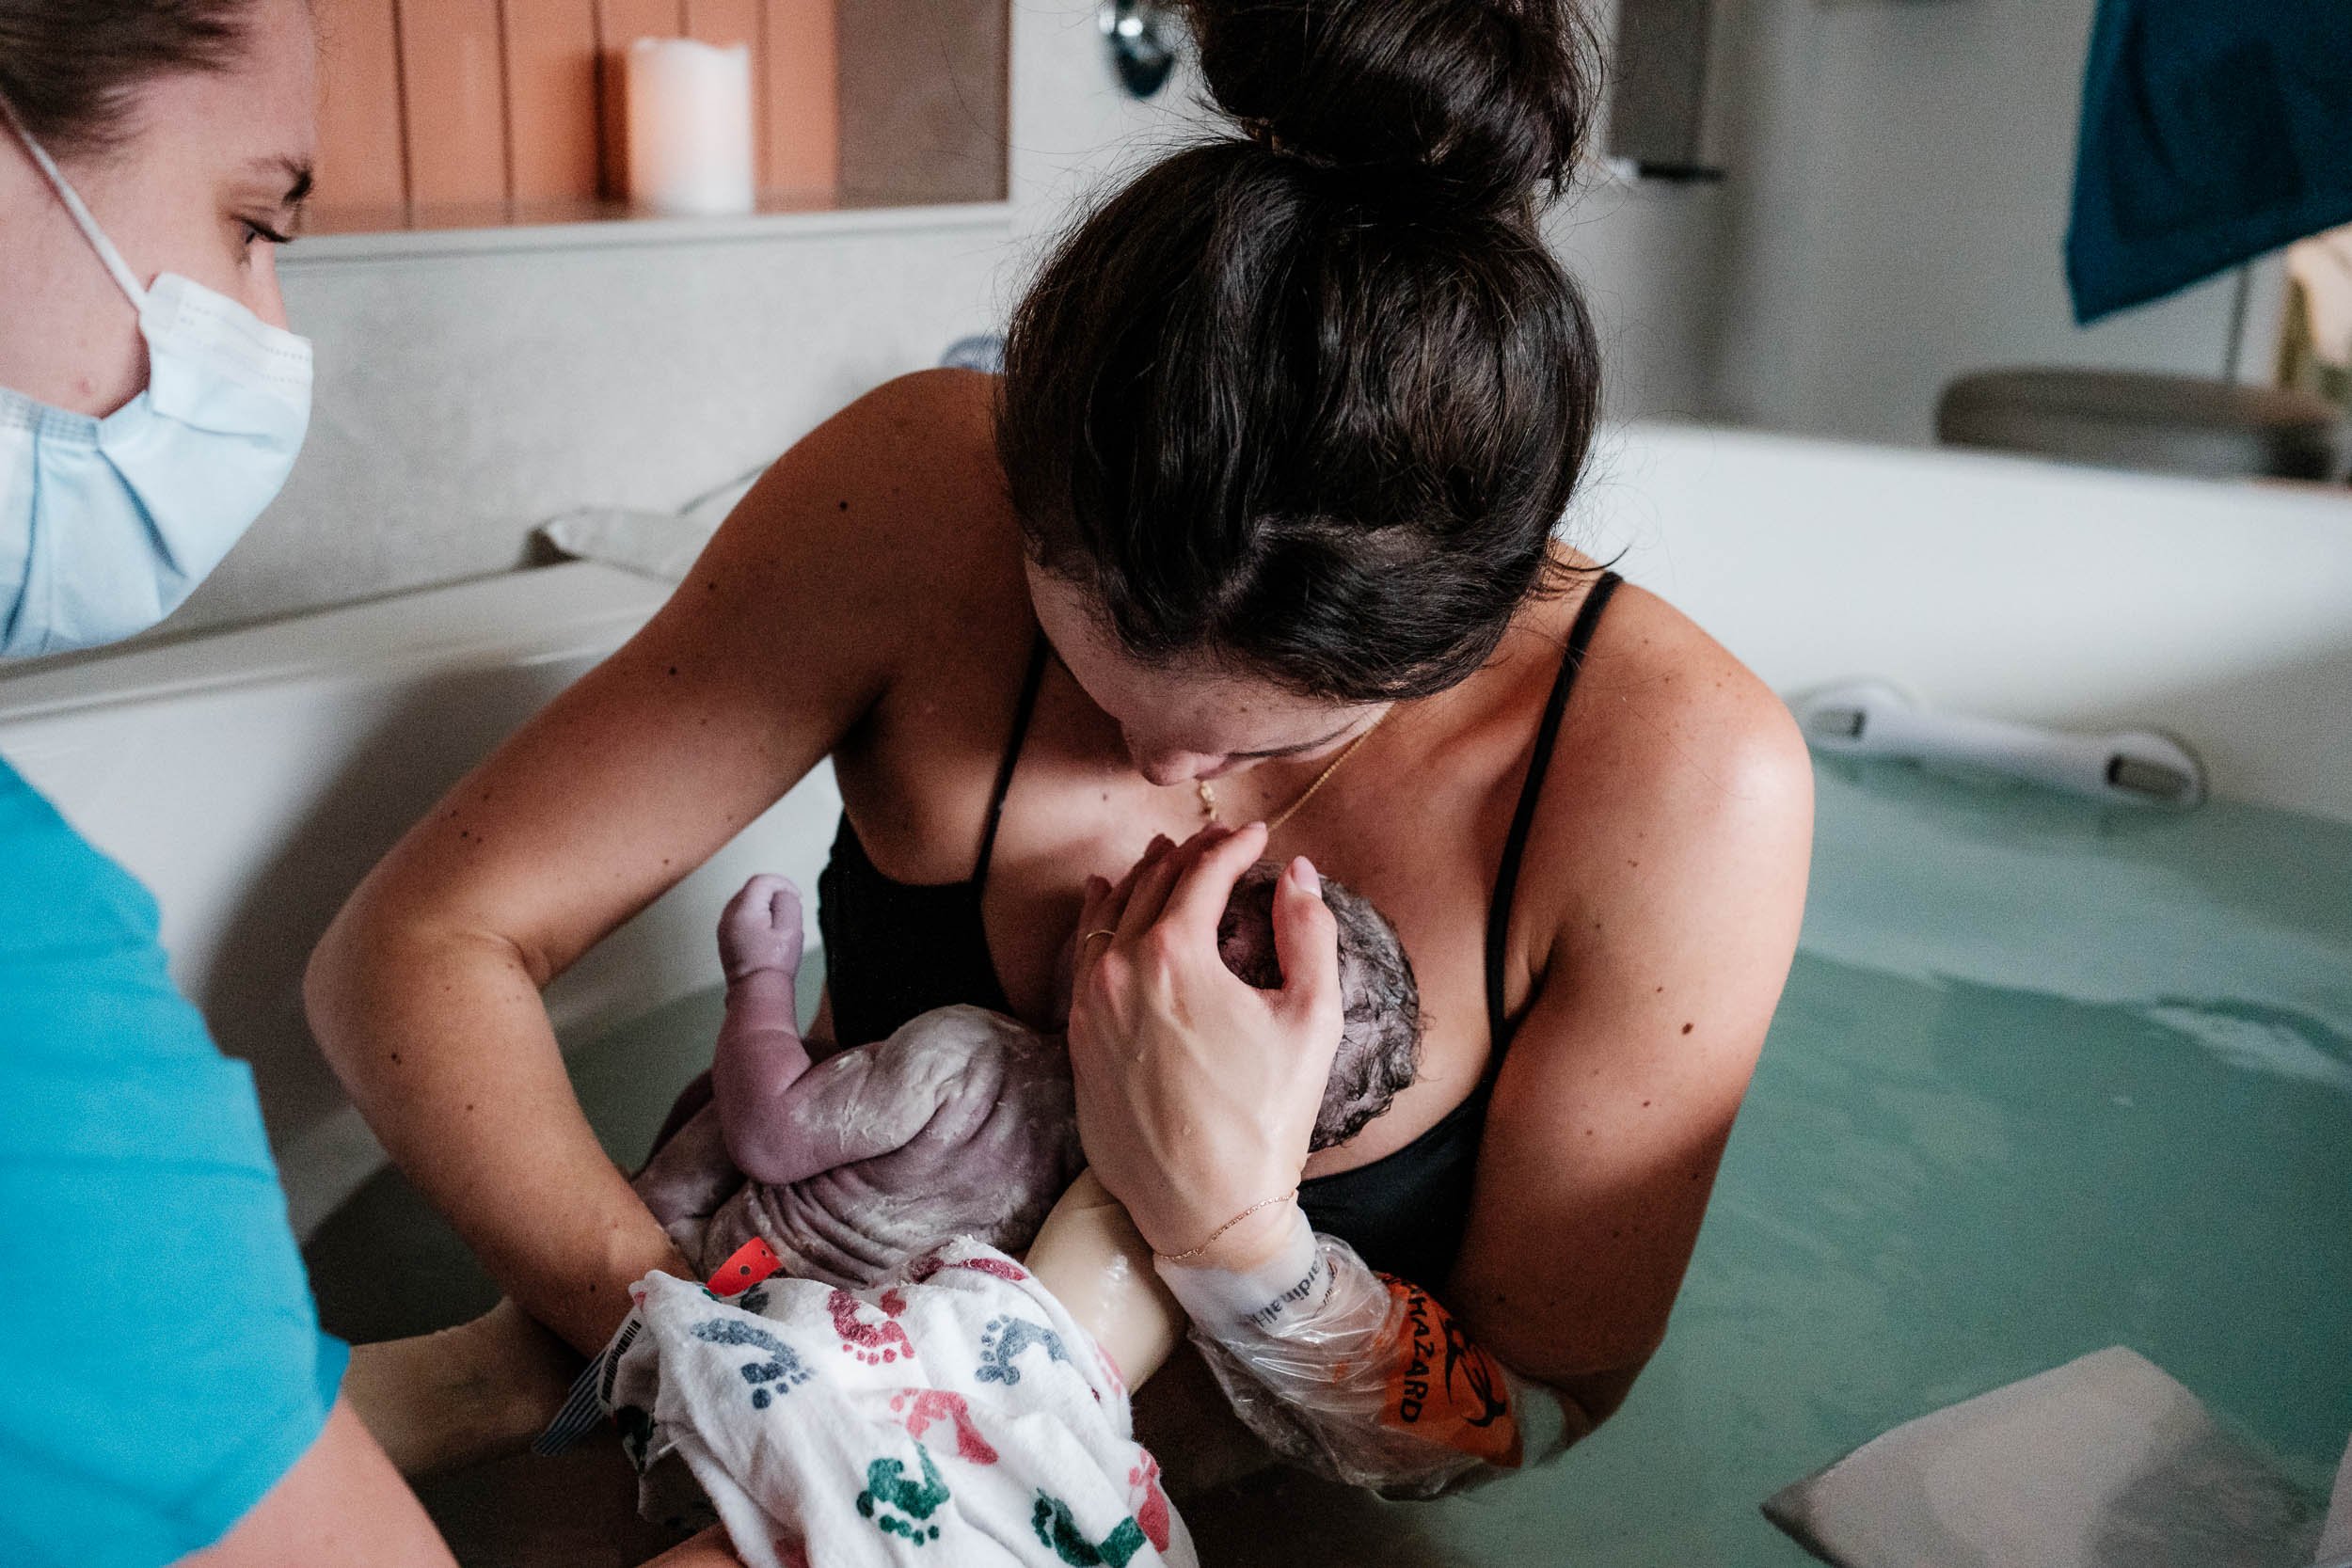 A mother brings her baby up to her chest immediately after giving birth to him in a birth tub at Virginia Mason in Seattle.